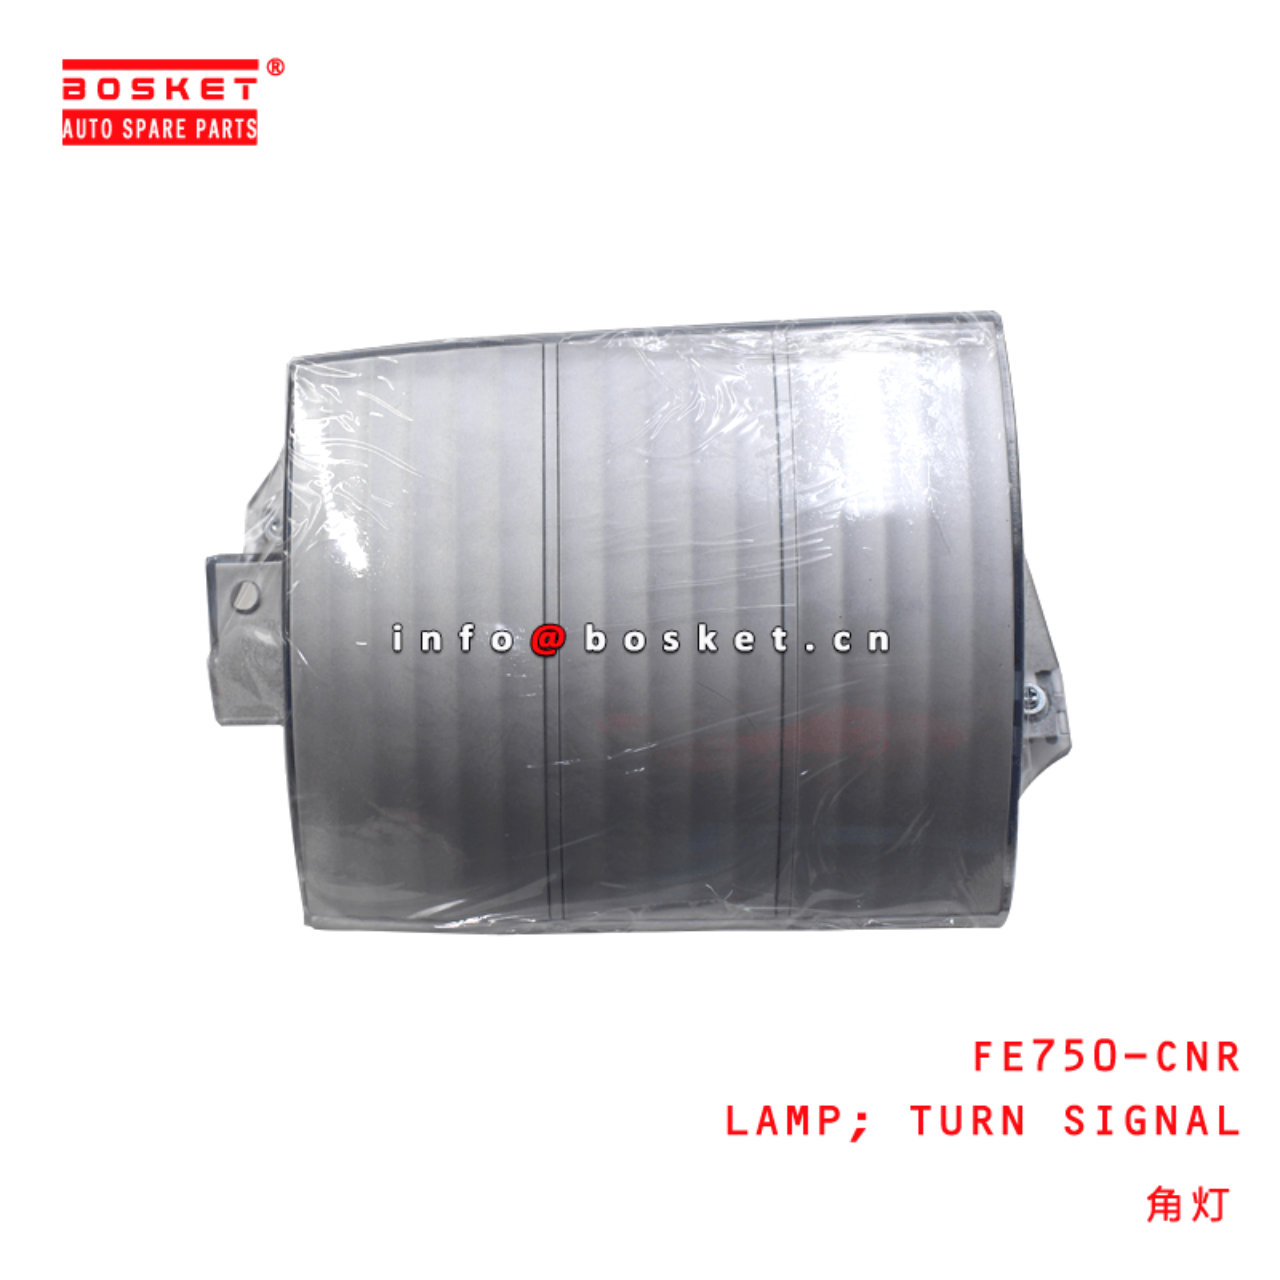 FE750-CNR Turn Signal Lamp Suitable For MITSUBISHI FUSO CANTER FE